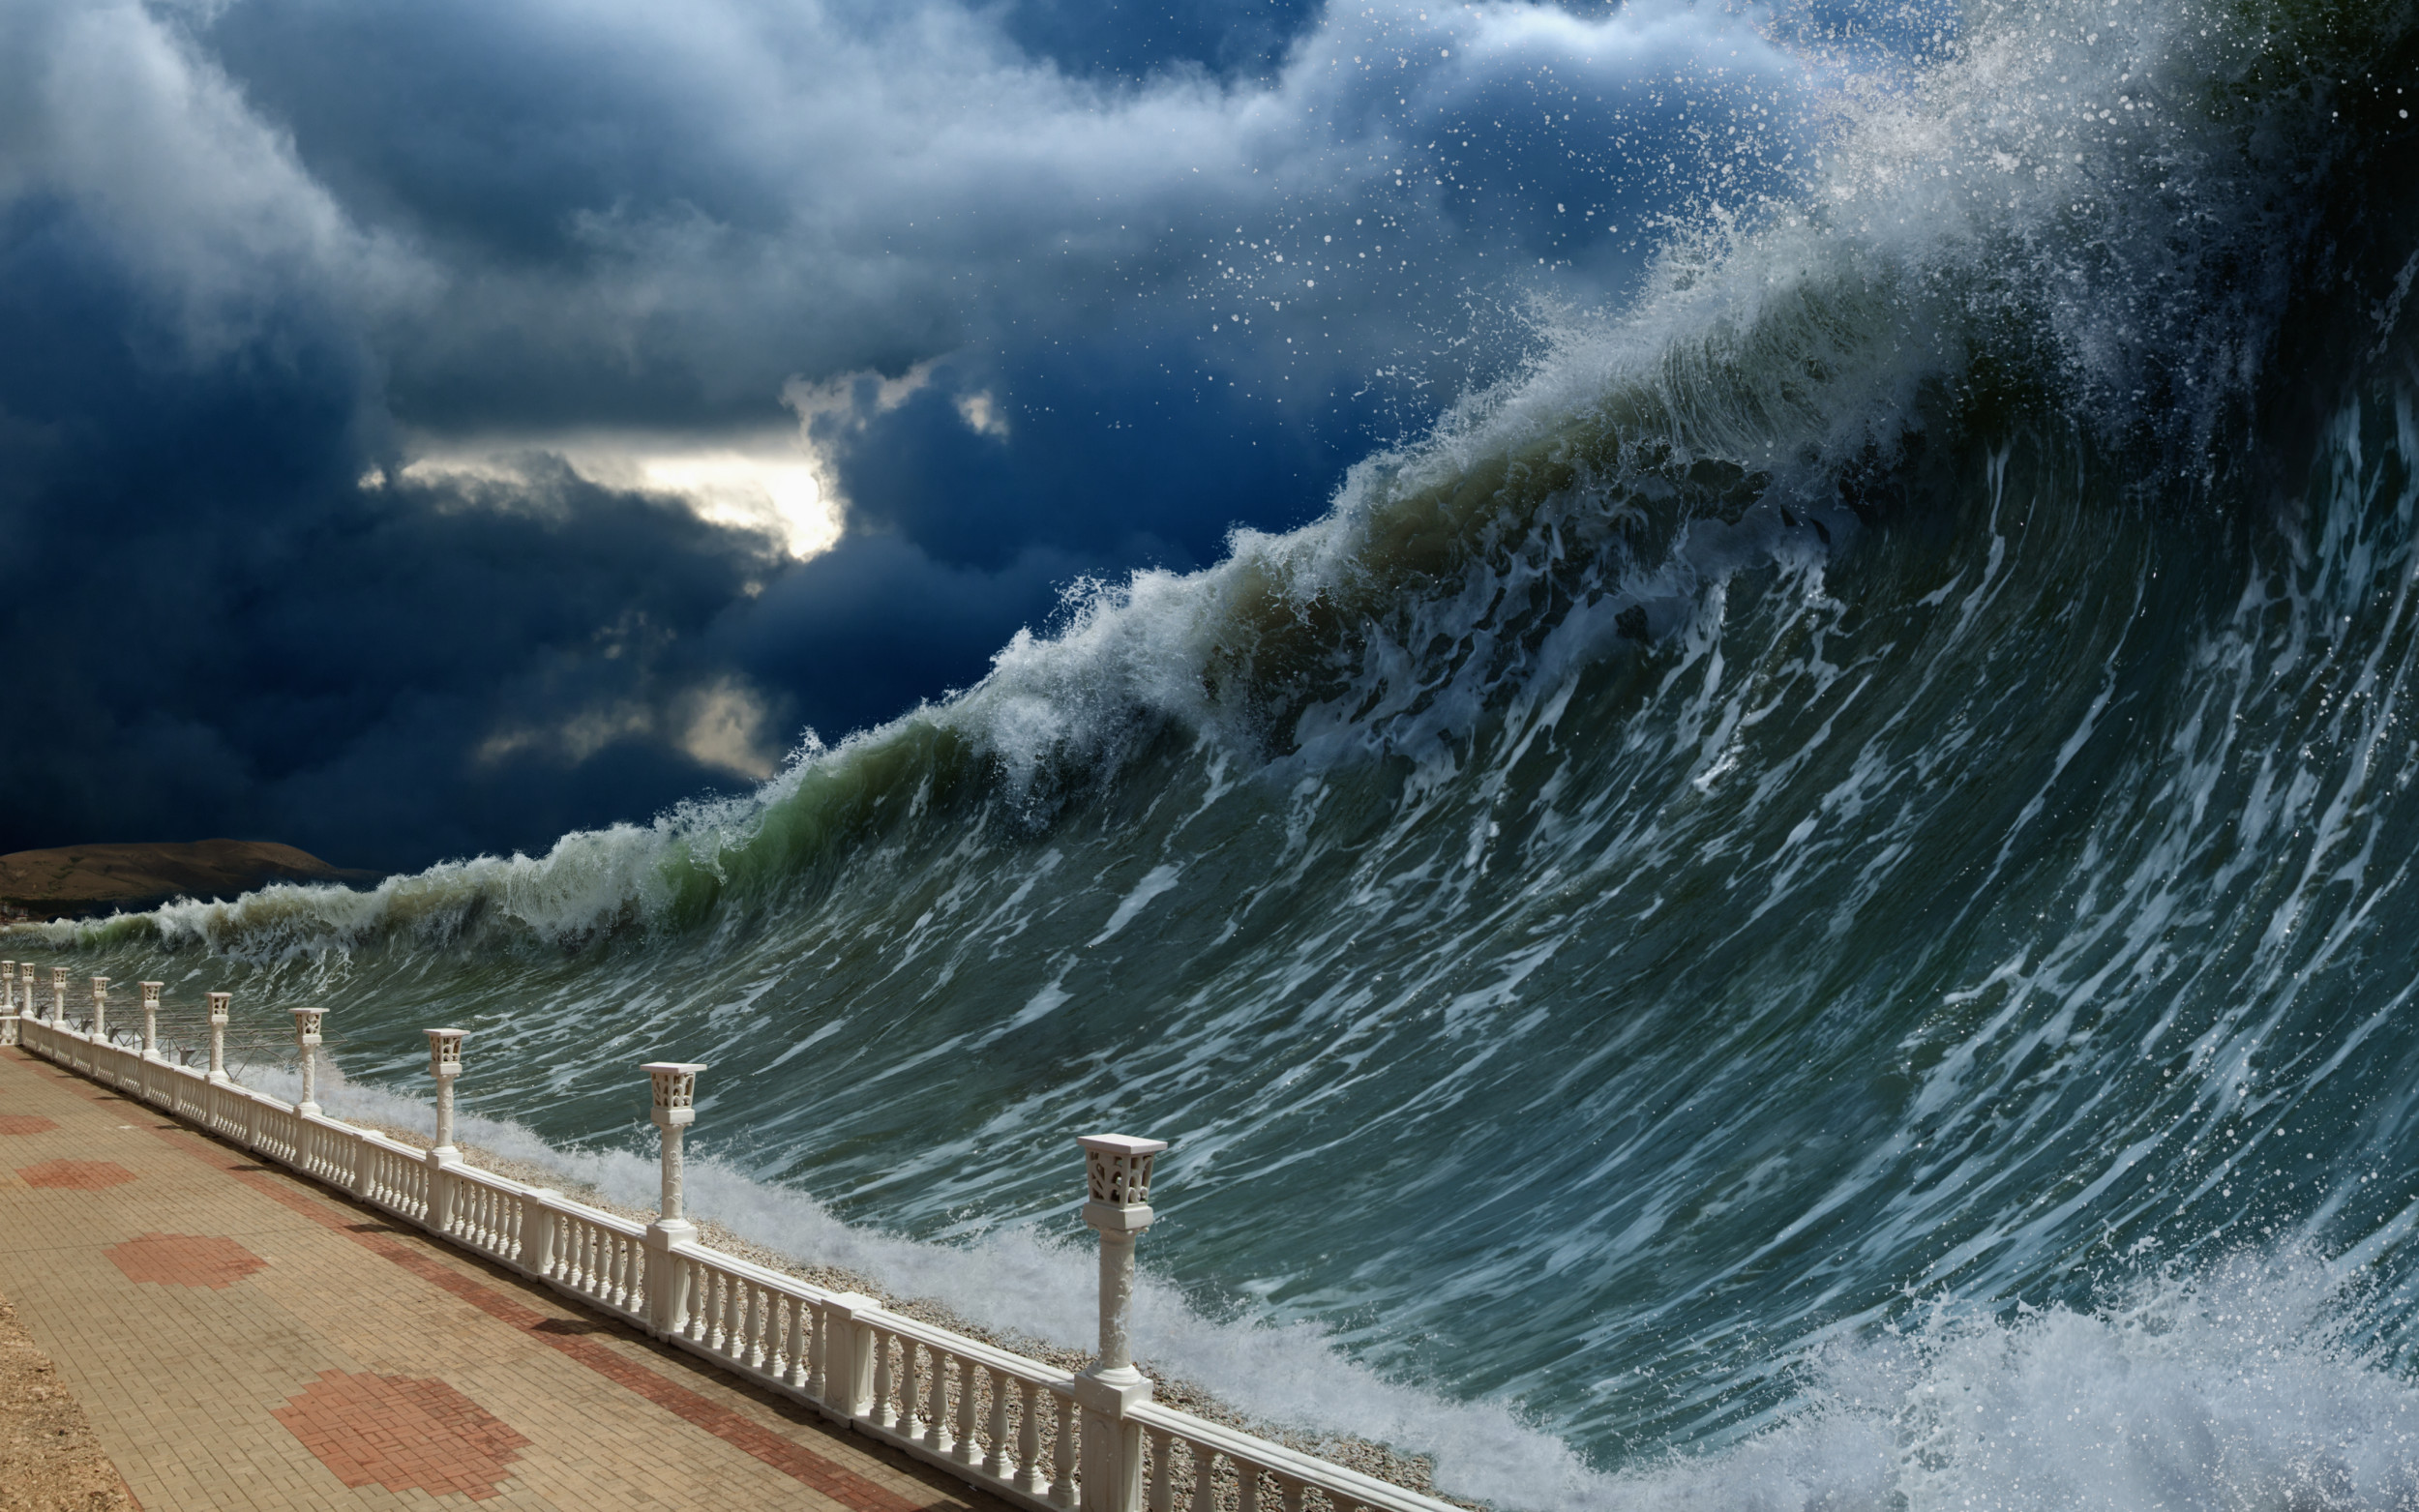 Try Before You Buy: Great Opportunity or Ecommerce Returns Tsunami